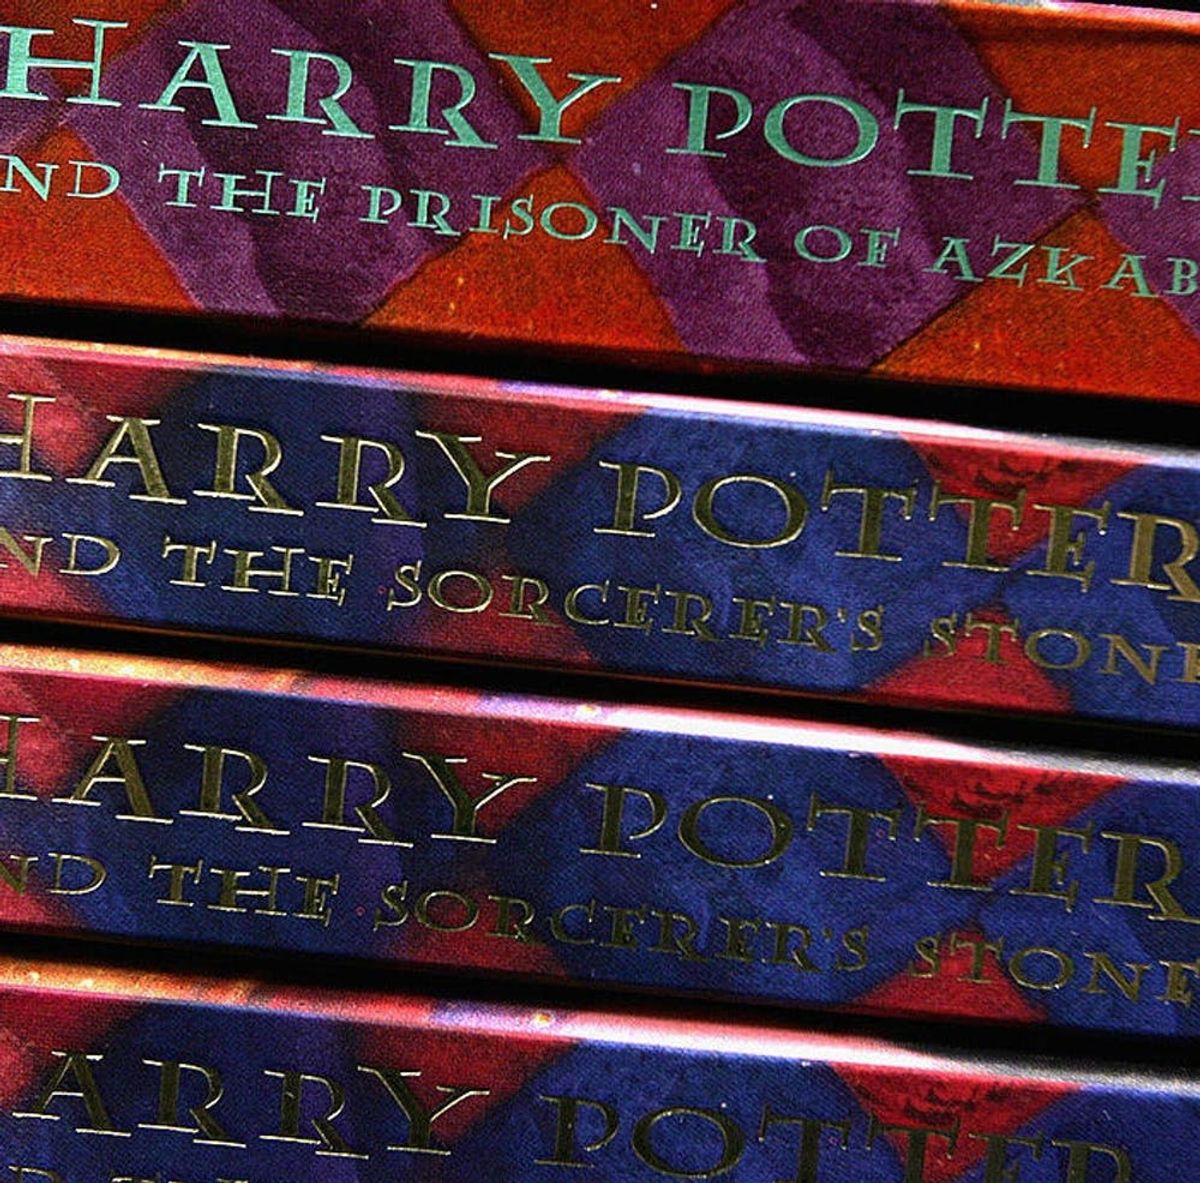 The Harry Potter Universe Is Expanding Yet Again With Two Magical New Books